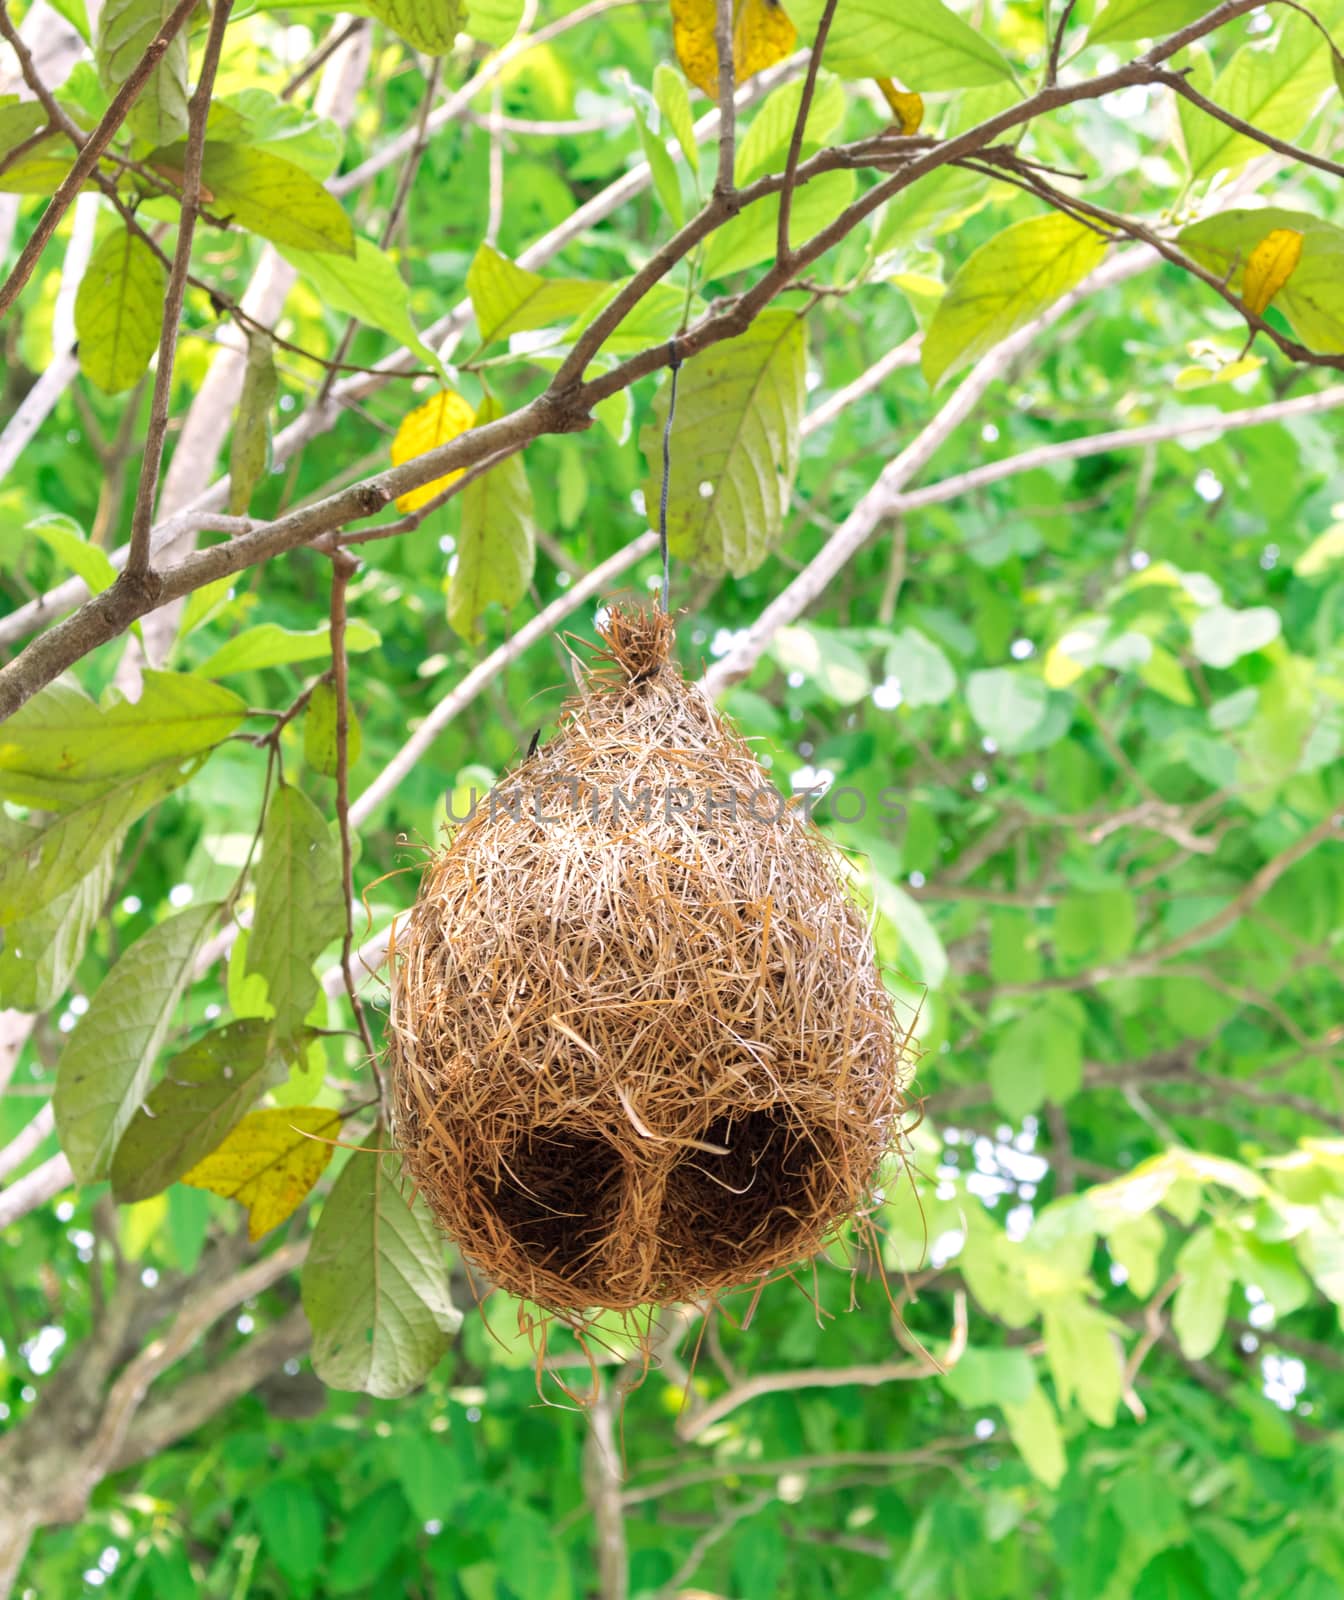 Nest on tree branch, forest nature background